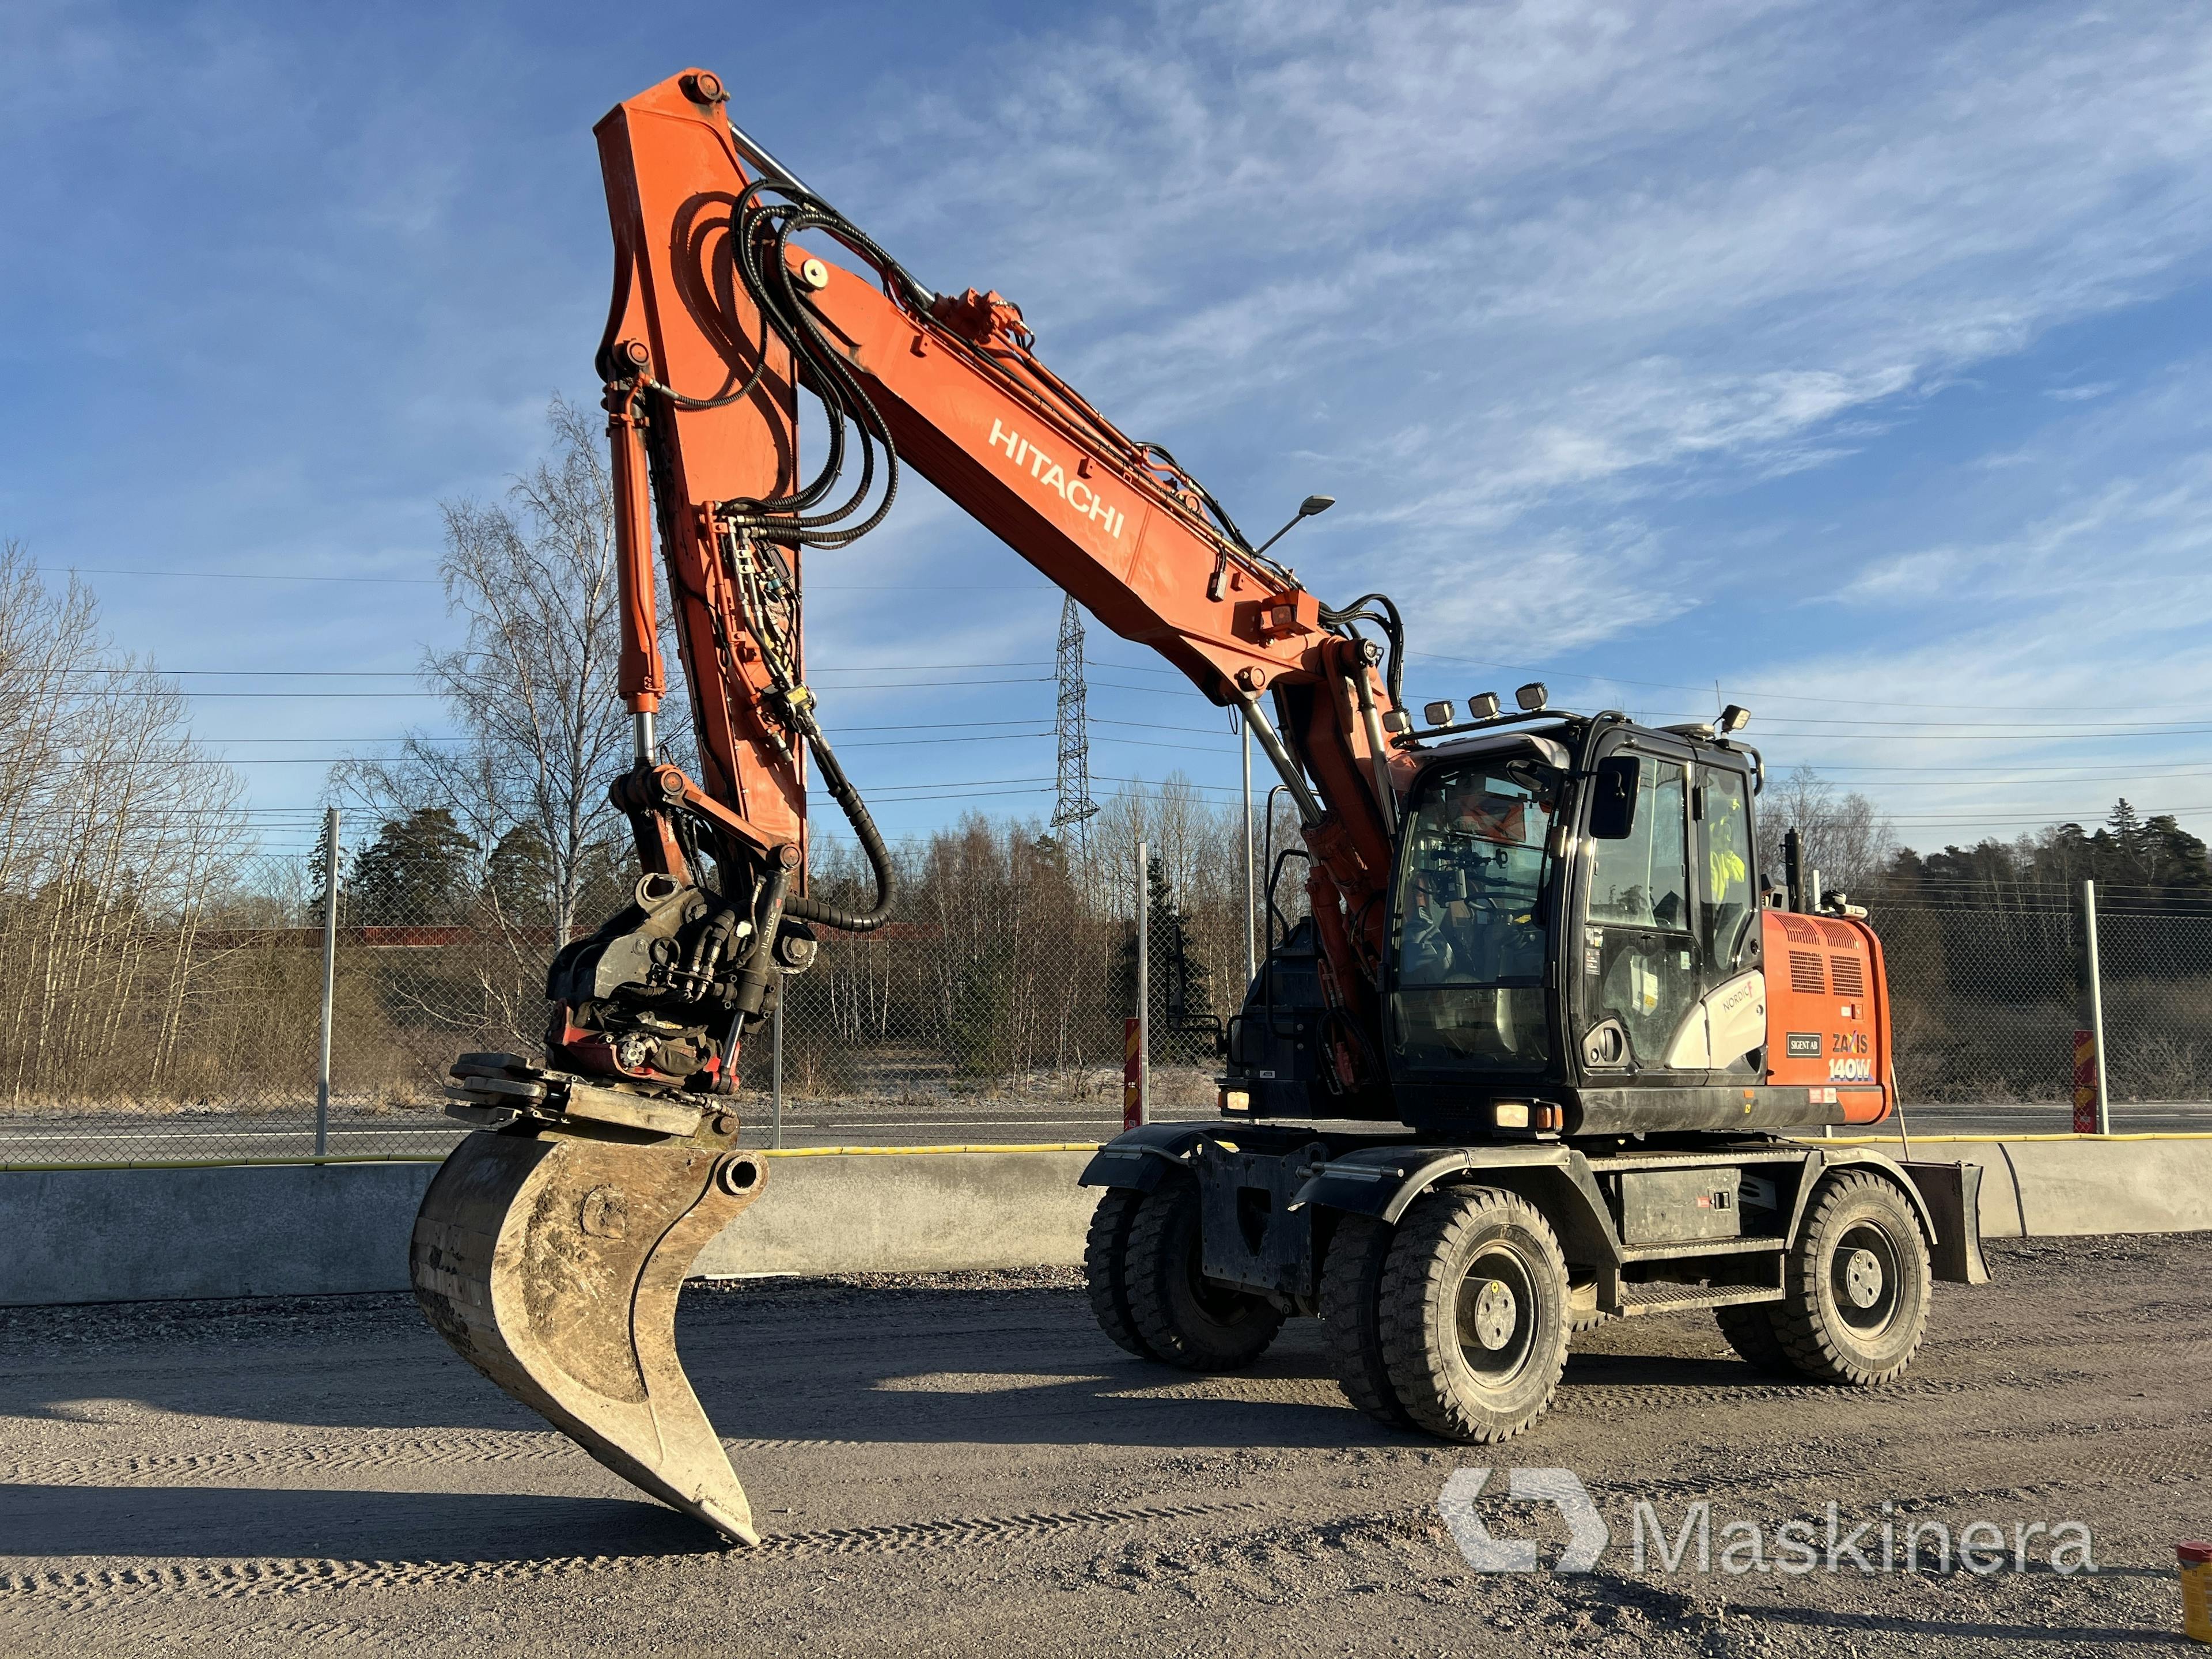 Wheel excavator Hitachi ZX 140W-6 with trolley, 7 attachments & digging system